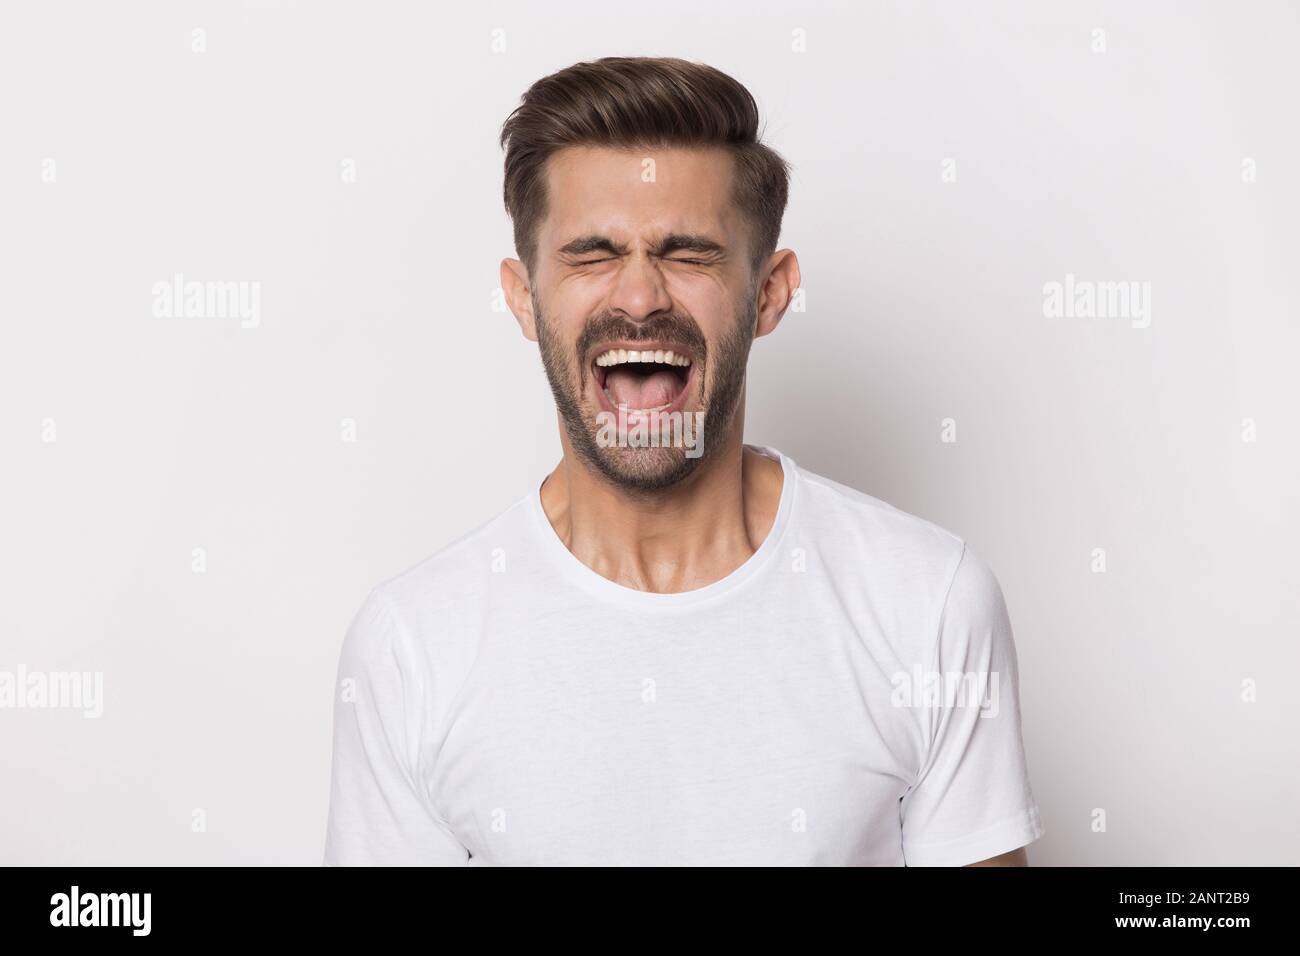 Angry stressed outraged hysterical millennial guy screaming. Stock Photo